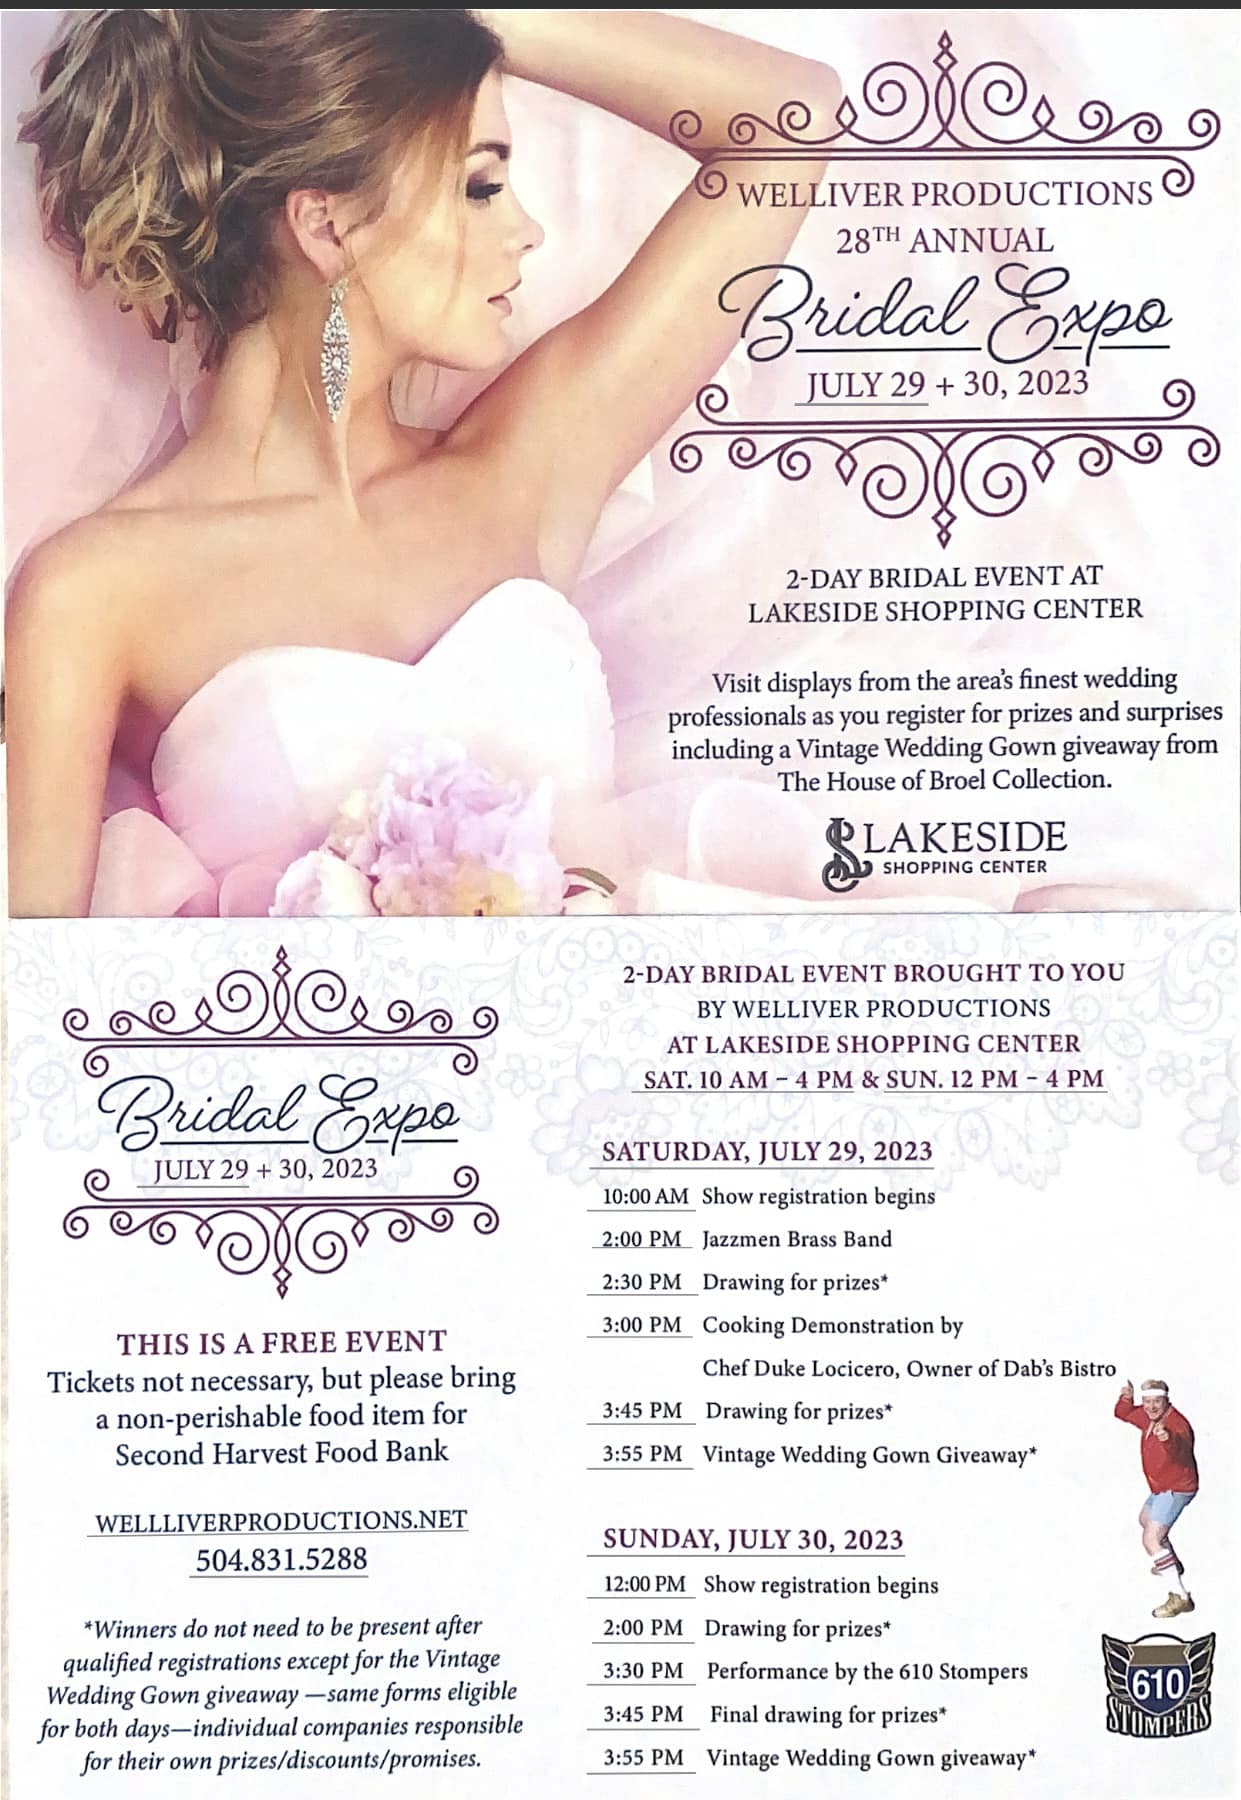 Welliver Productions 28th Annual Bridal Show July 28 and 29, 2023 at Lakeside Mall in Metairie, LA